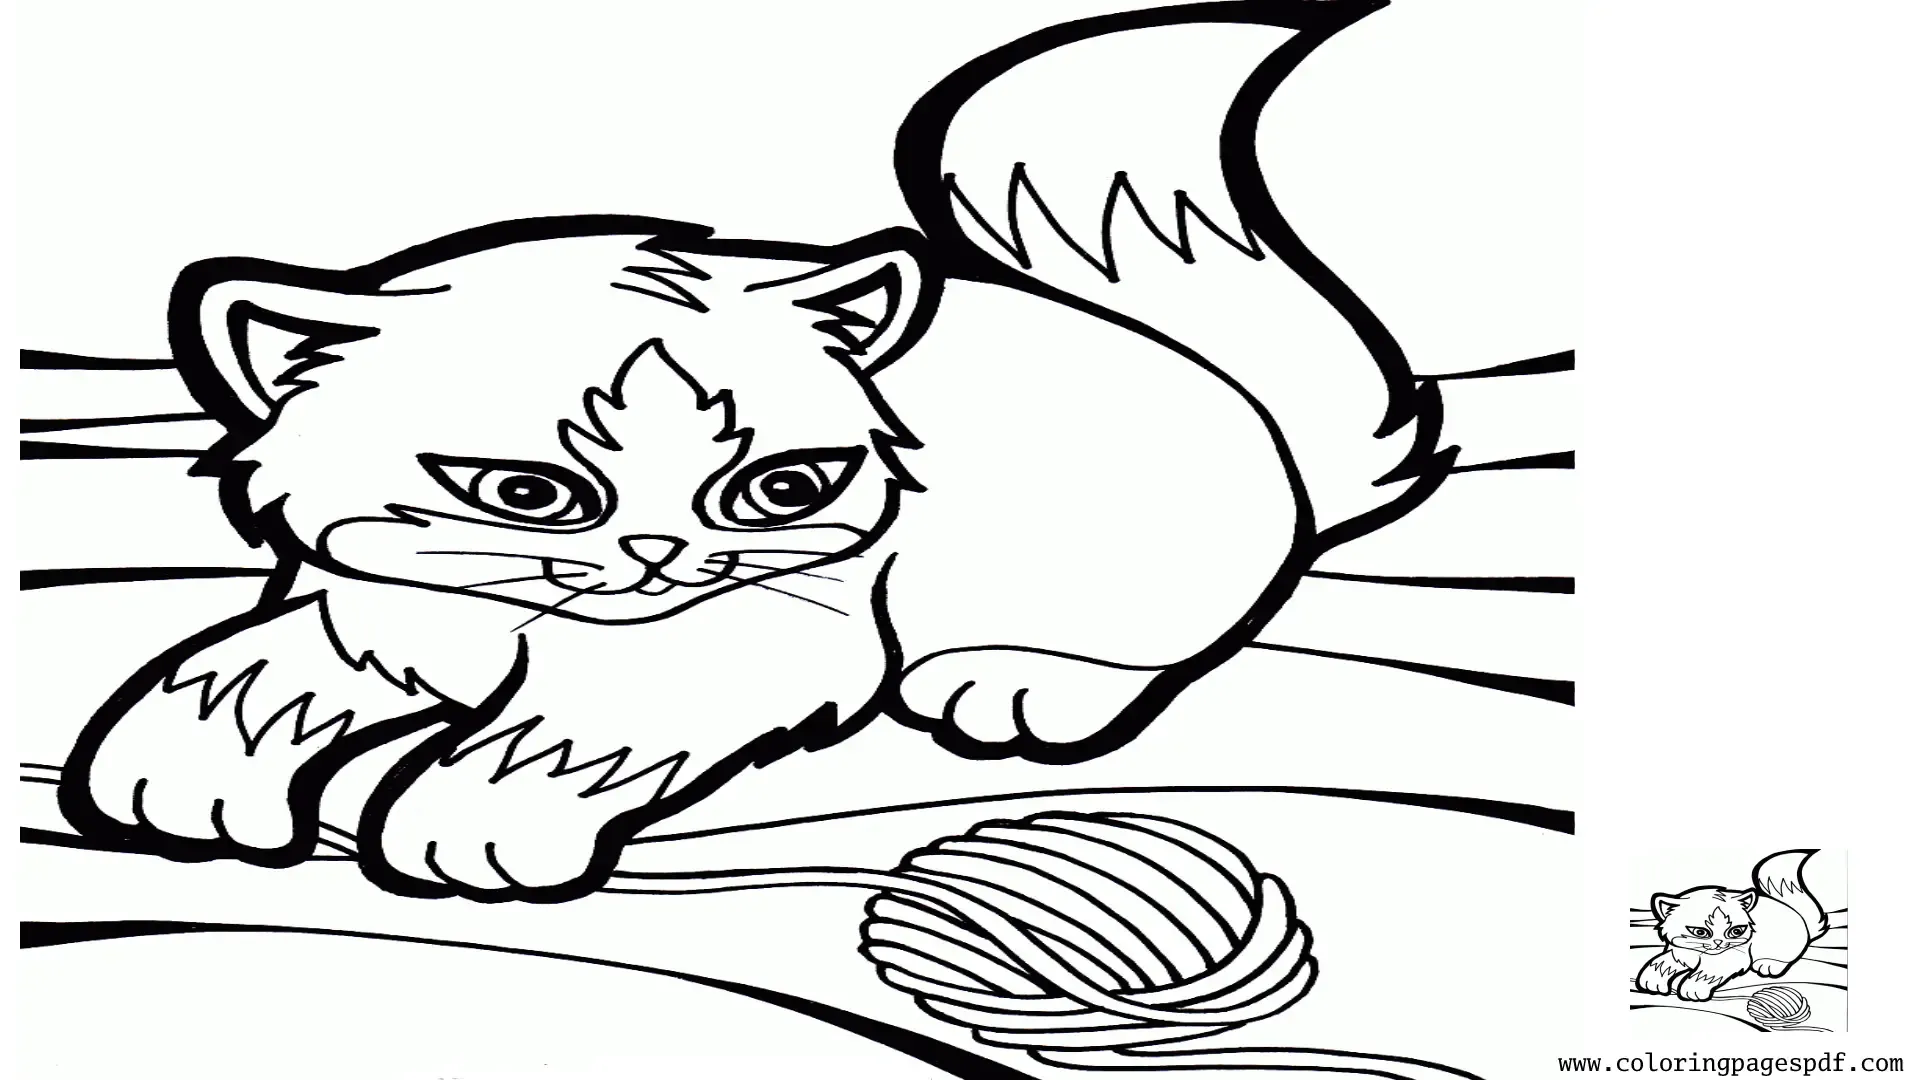 Coloring Page Of A Kitten Playing With A Sewing Ball